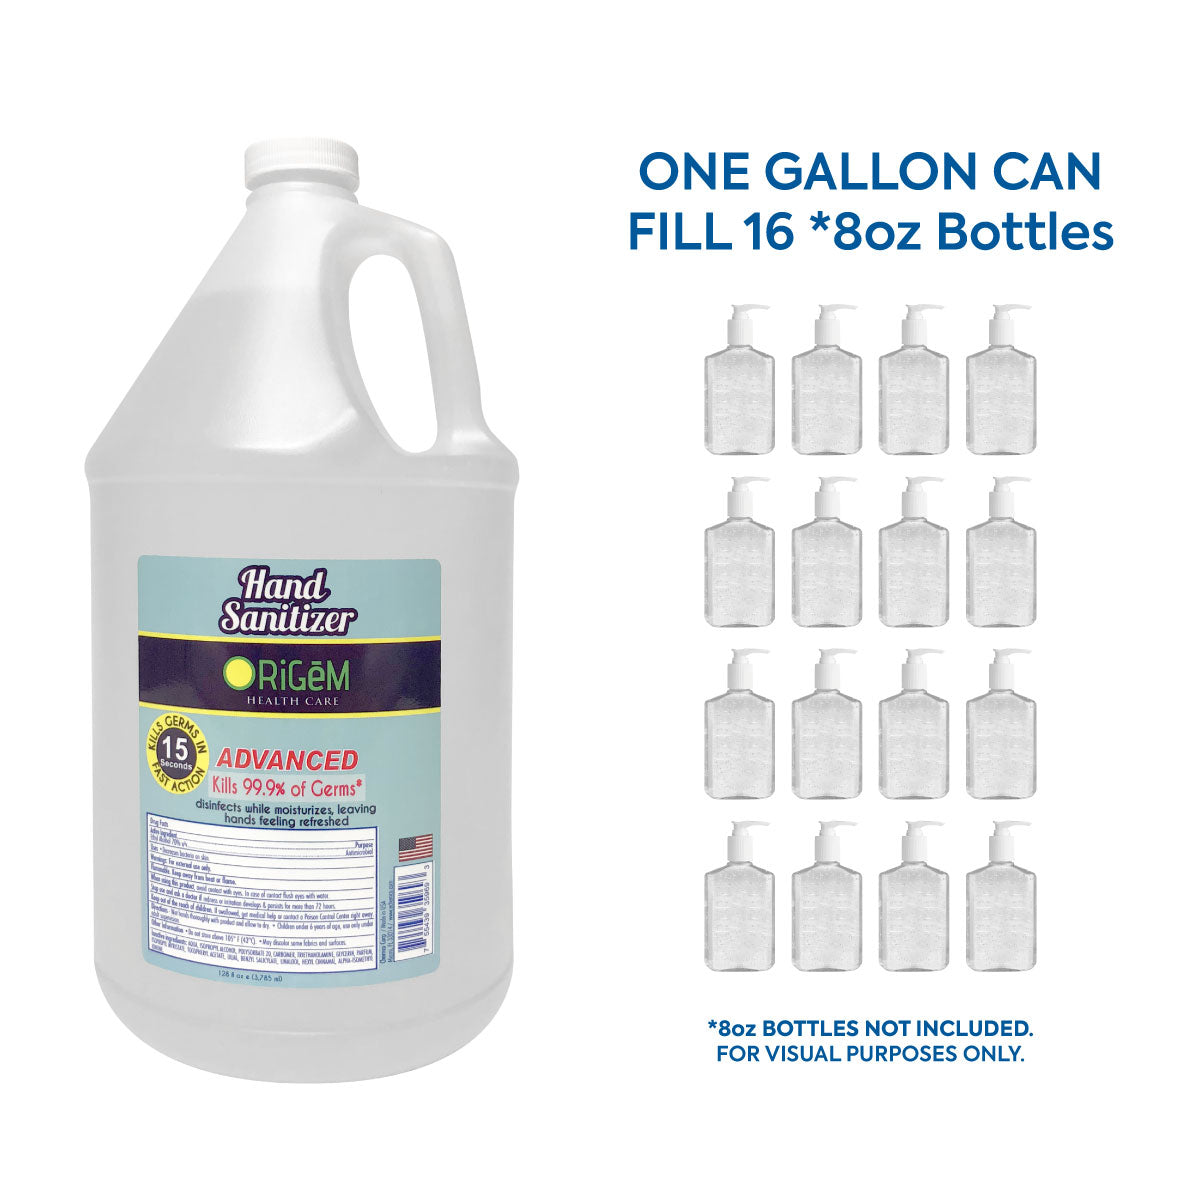 70% Ethyl Alcohol Gel Hand Sanitizer Gallon | Made in USA